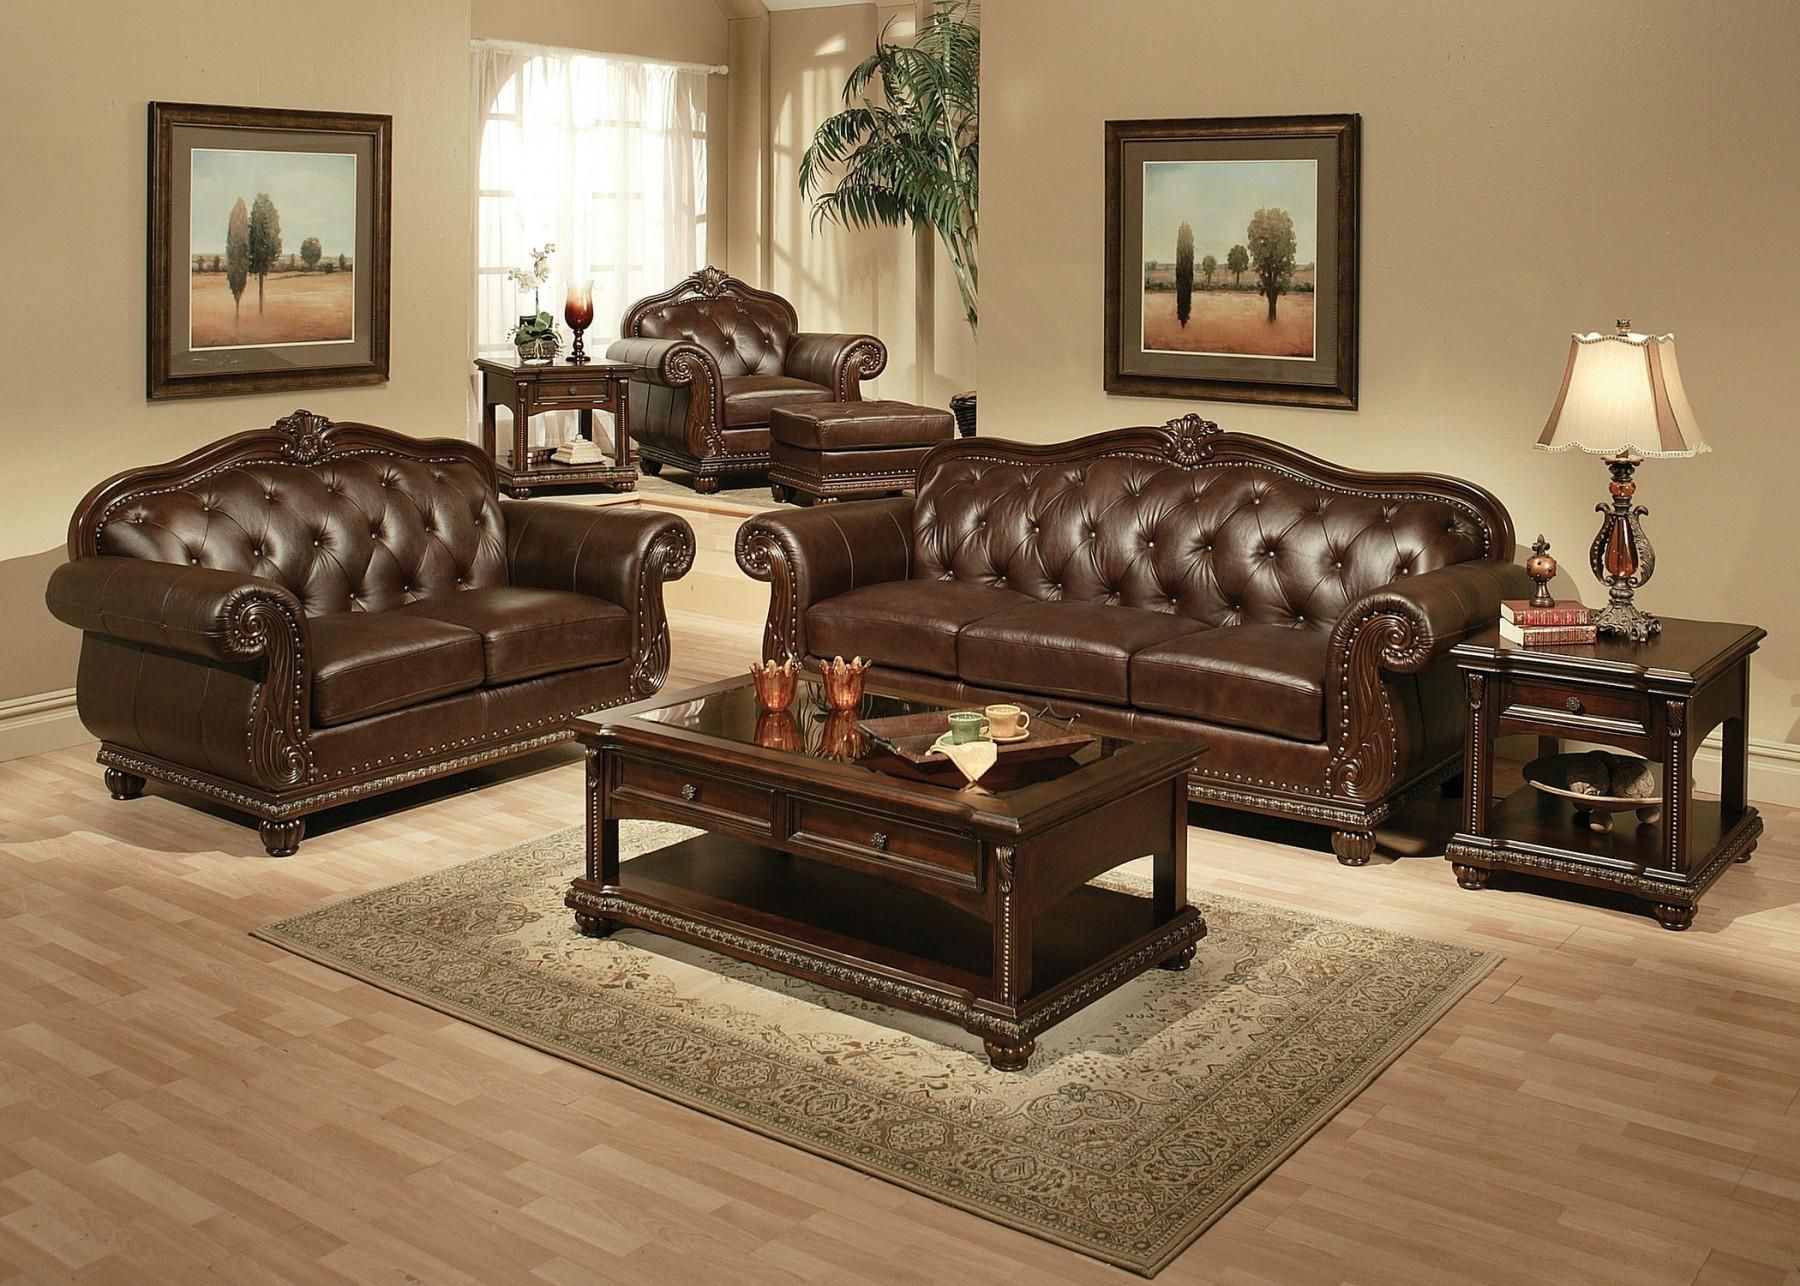 Acme Furniture 15030 Anondale Espresso Top Grain Leather Sofa Set 5 Pcs  Classic – Buy Online On Ny Furniture Outlet Within Top Grain Leather Loveseats (View 14 of 15)